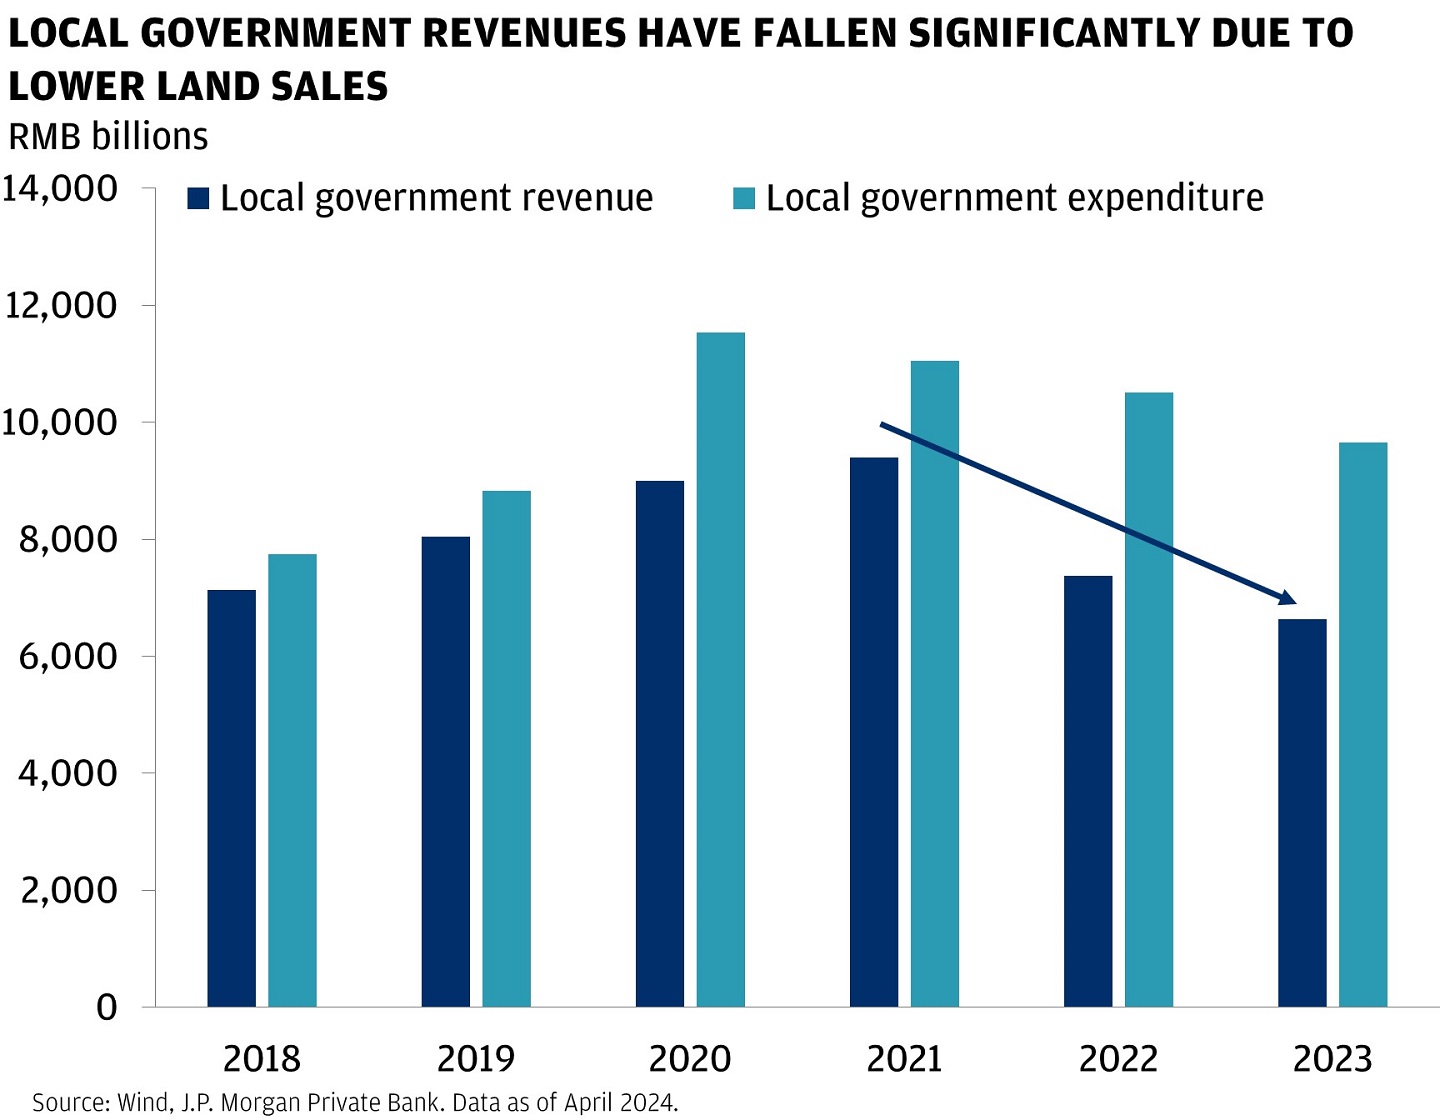 This bar graph shows China’s local government revenue and expenditure from 2018 to 2023, in RMB billions.